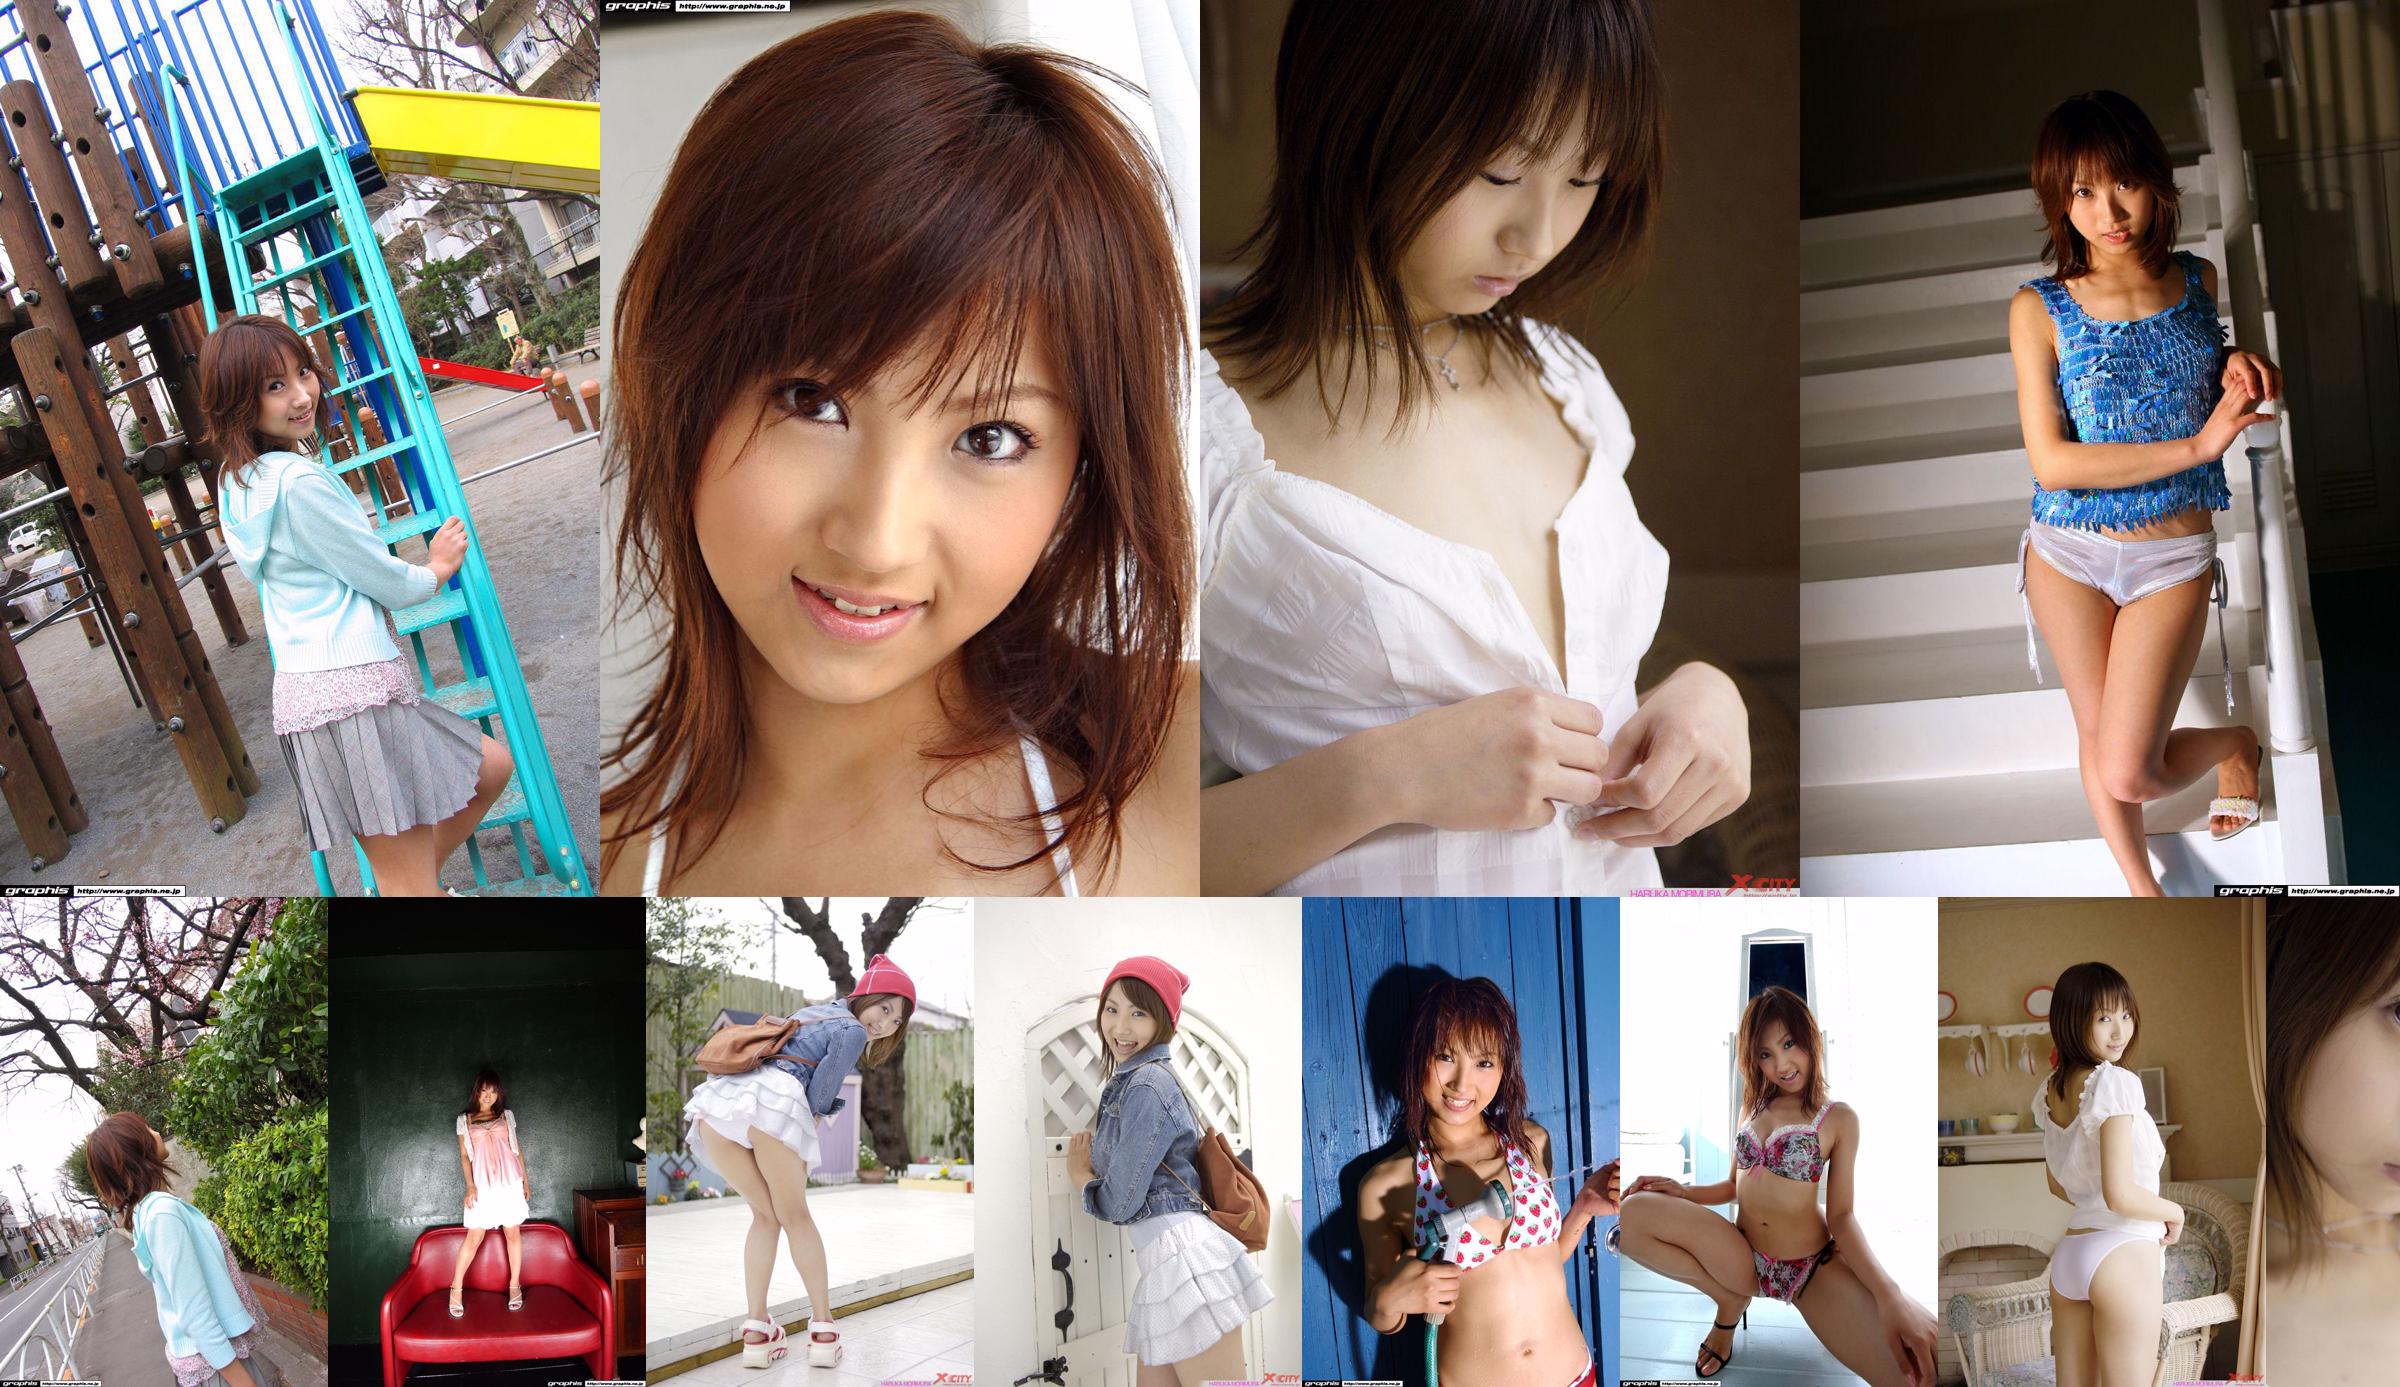 Haruka Morimura "Once upon a Moment" [Graphis] Gals No.3537a4 Page 1